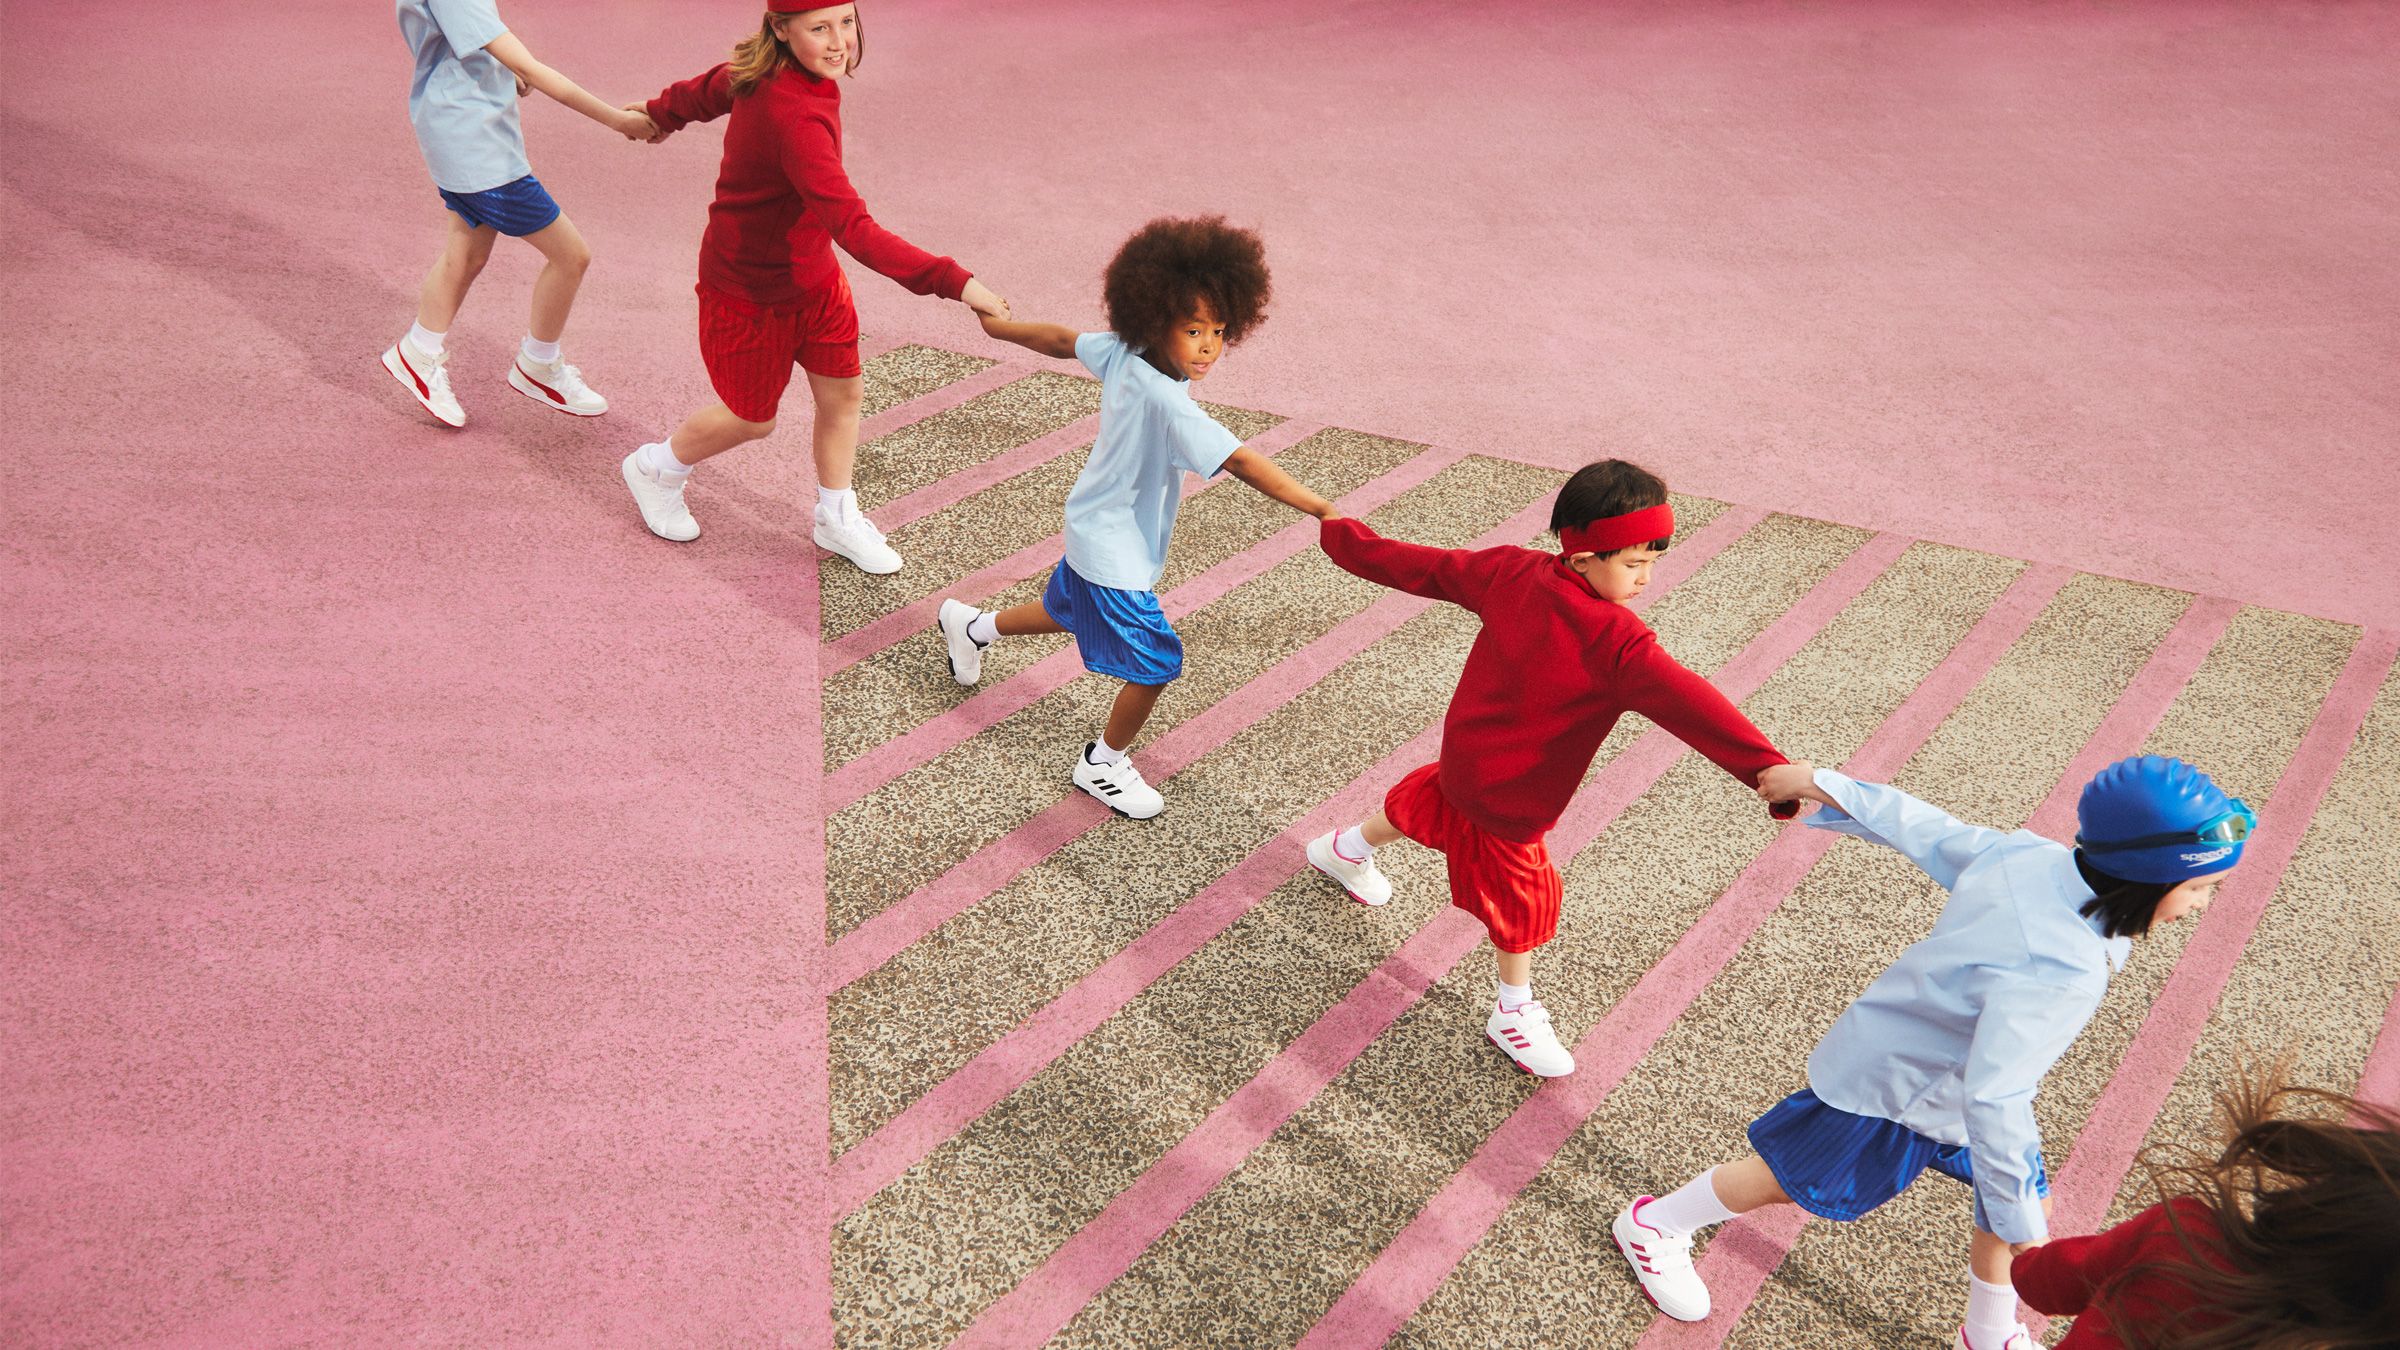 Image of a boy running across the playground with a periodic table in chalk on the floor